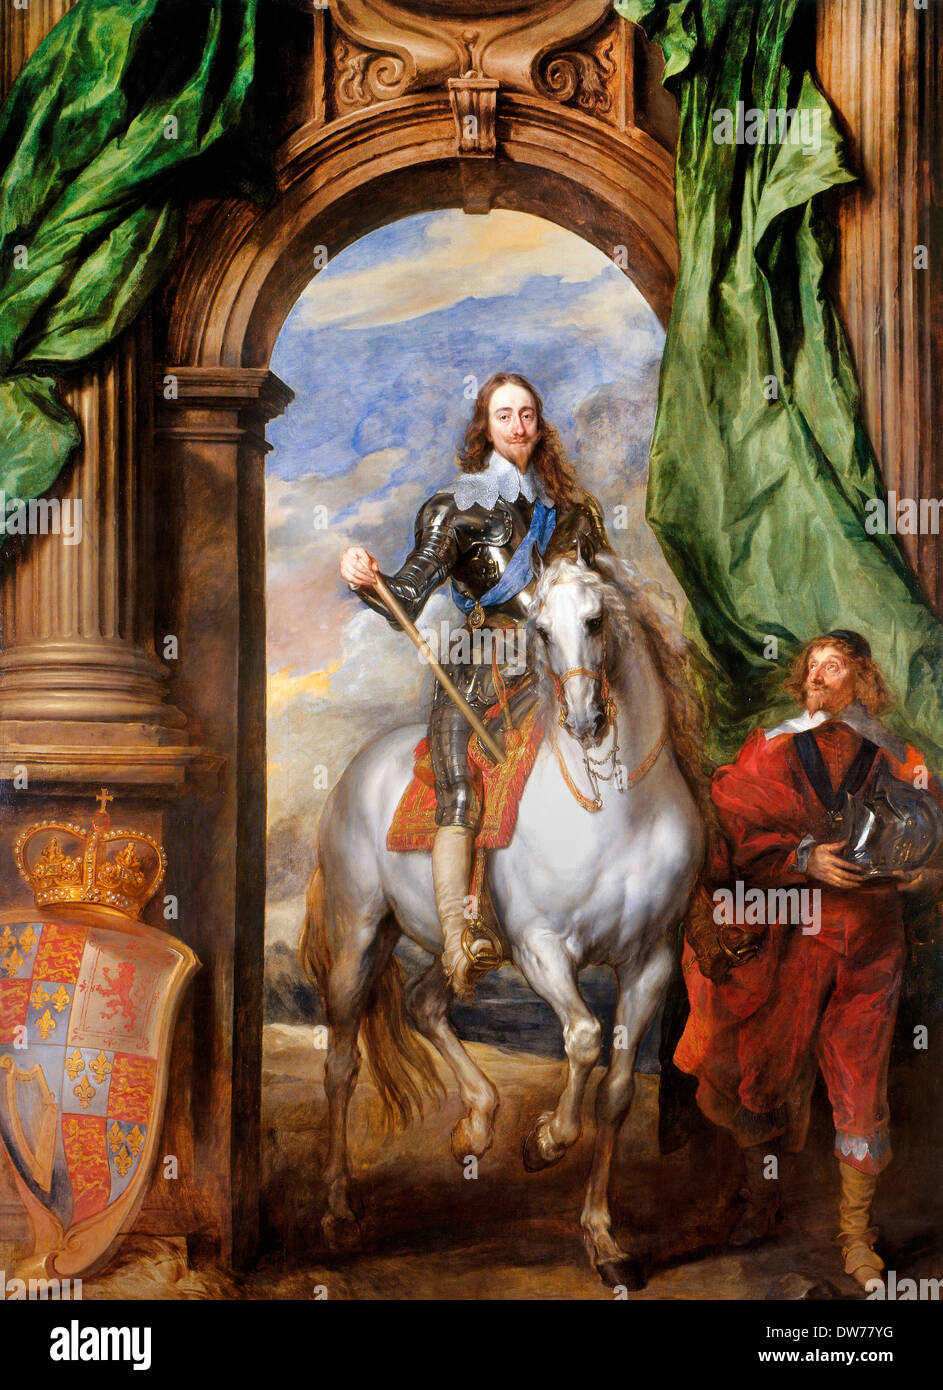 Anthony van Dyck, Charles I (1600-49) with M. de St Antoine 1633 Oil on canvas. Royal Collection of the United Kingdom. Stock Photo